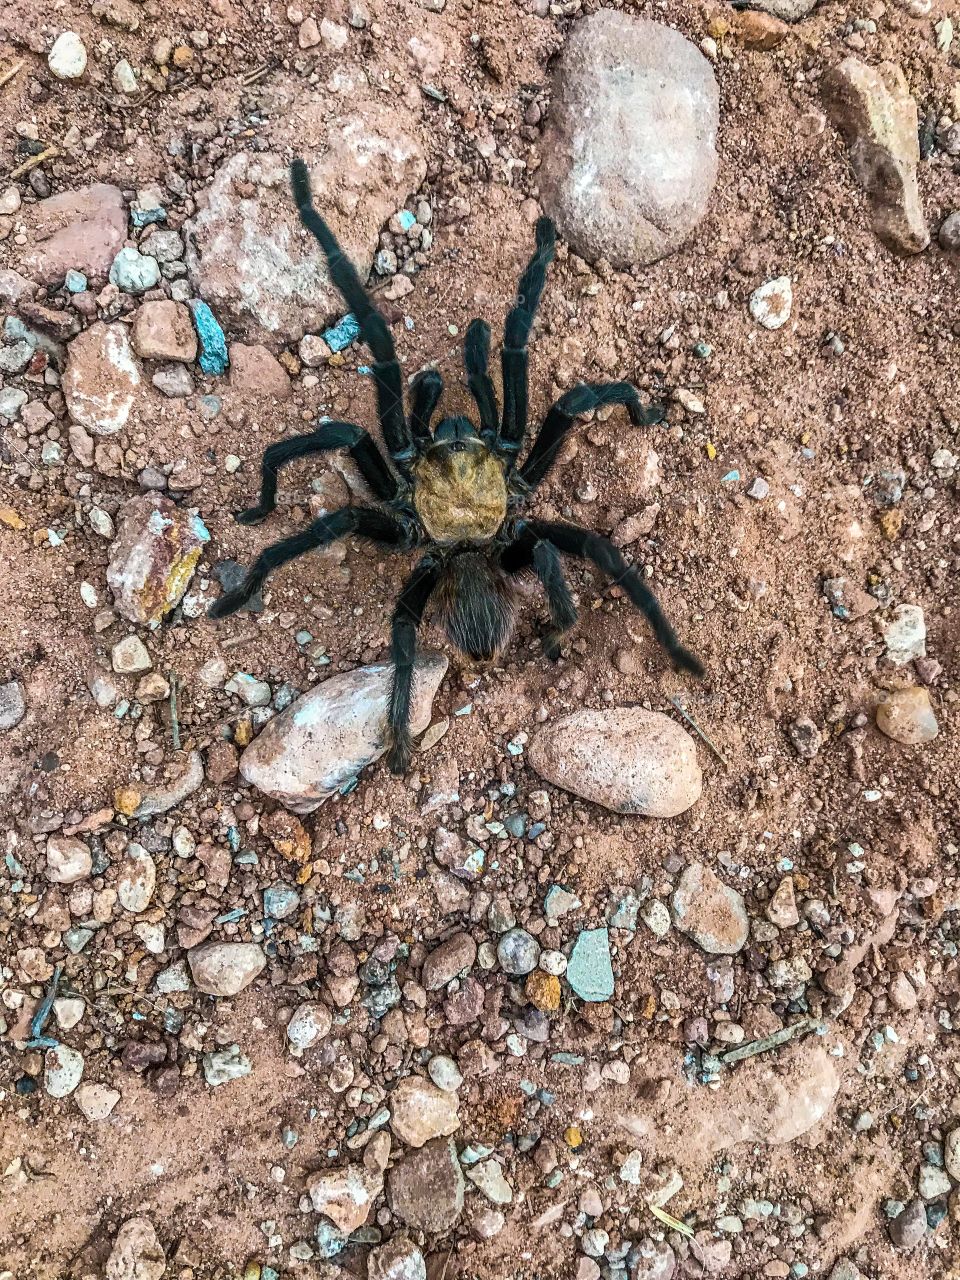 Tarantula that I almost stepped on in Palo Duro canyon 